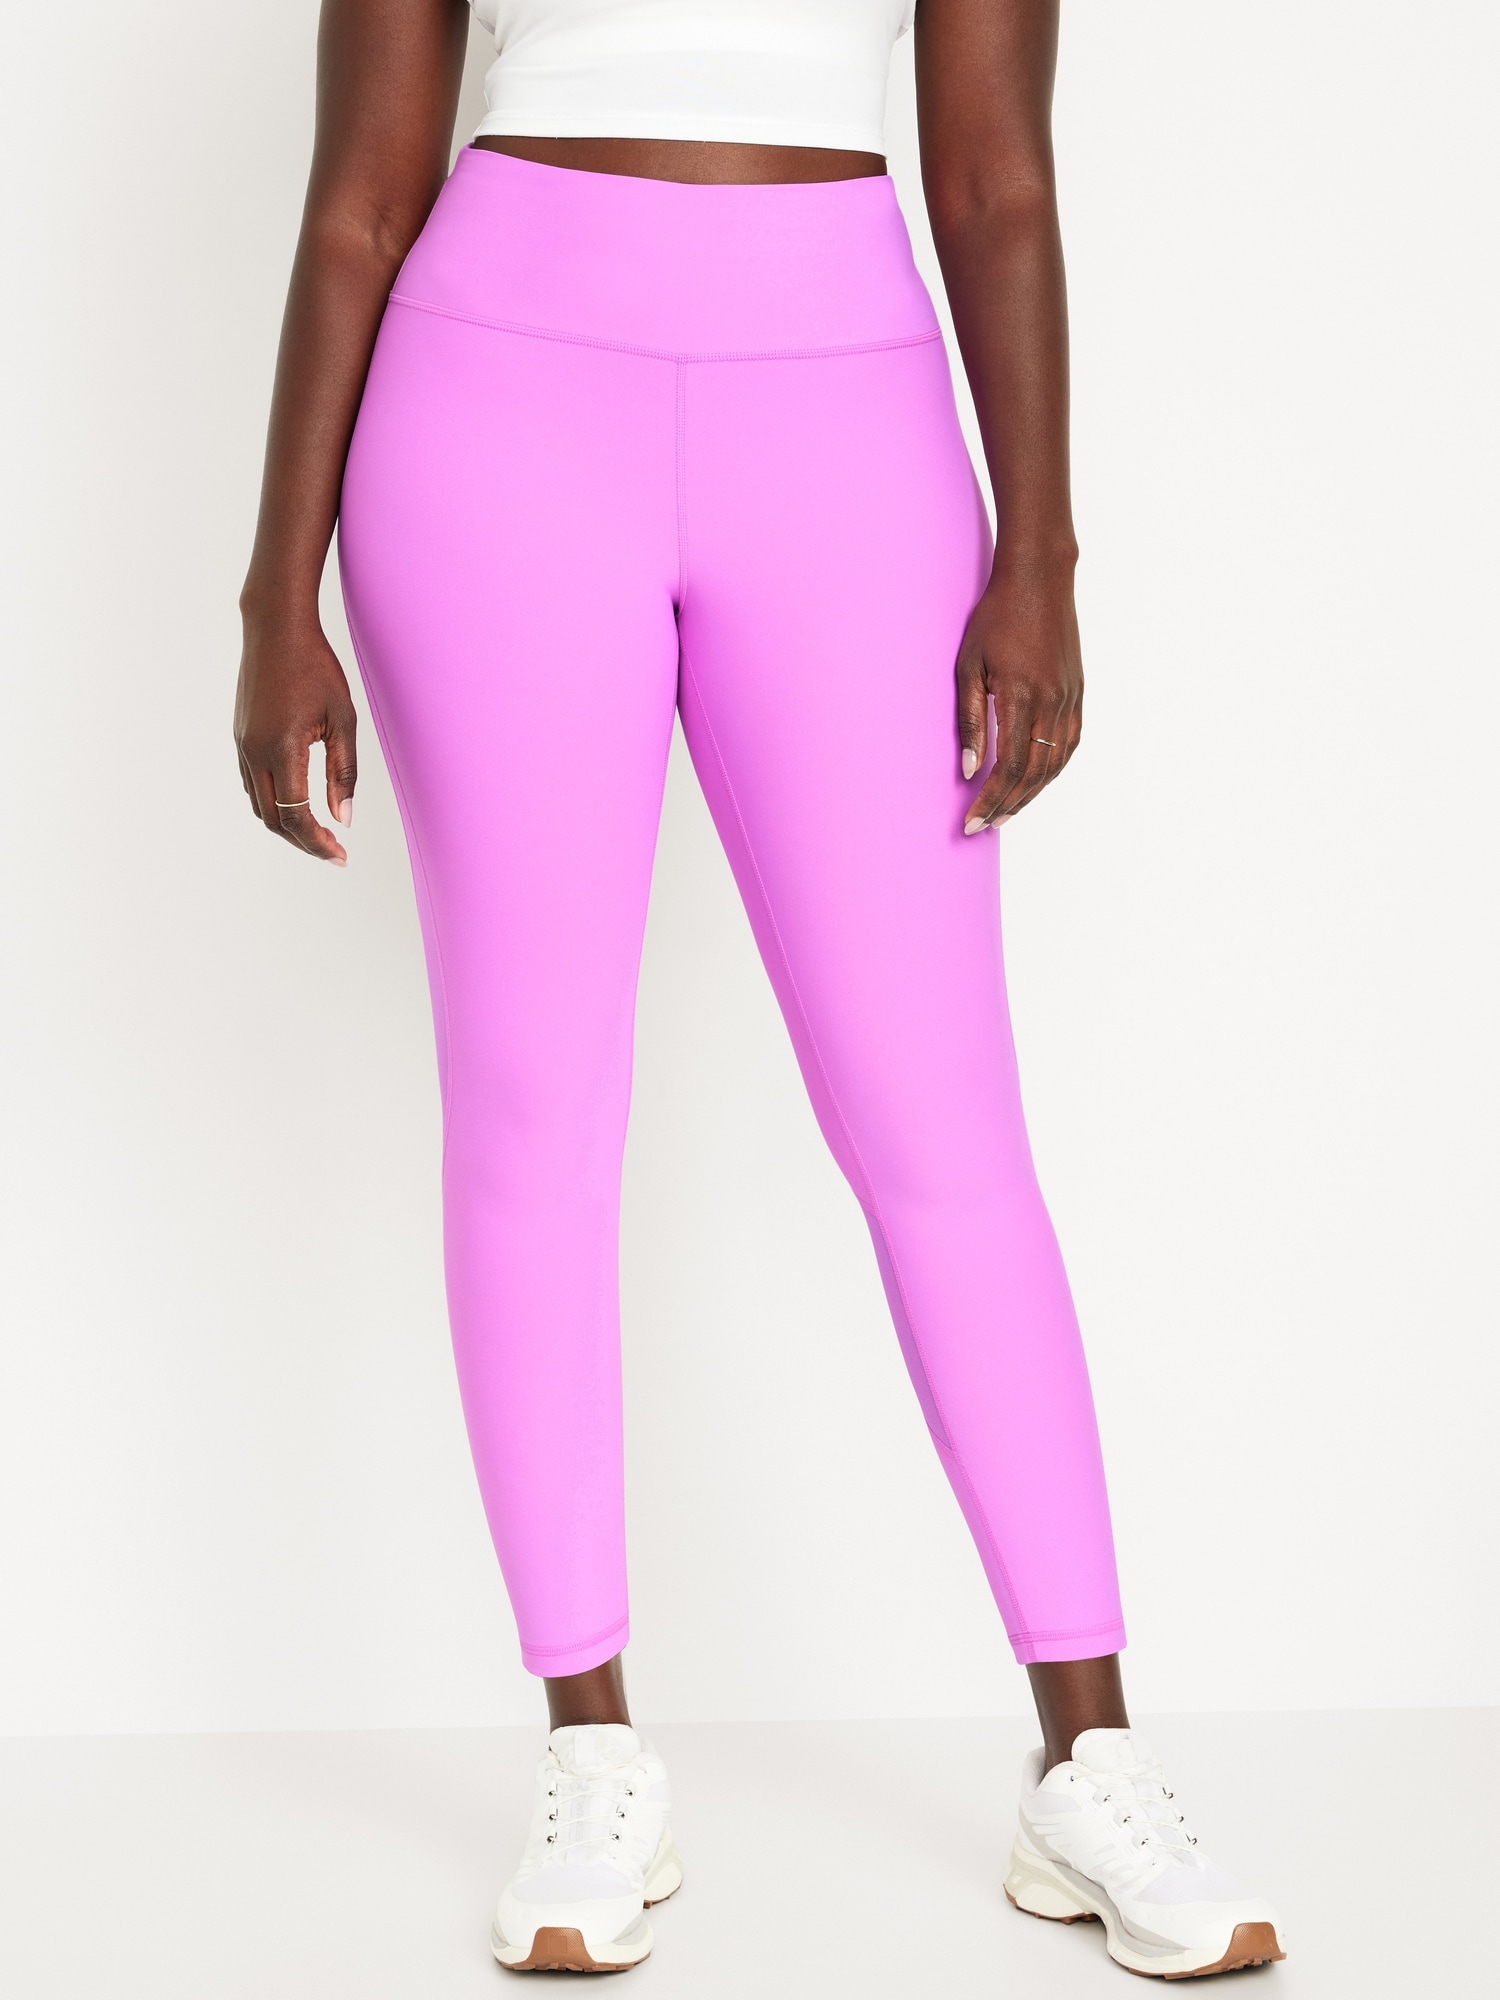 Extra High-Waisted PowerSoft 7/8 Leggings for Women, Old Navy in 2023